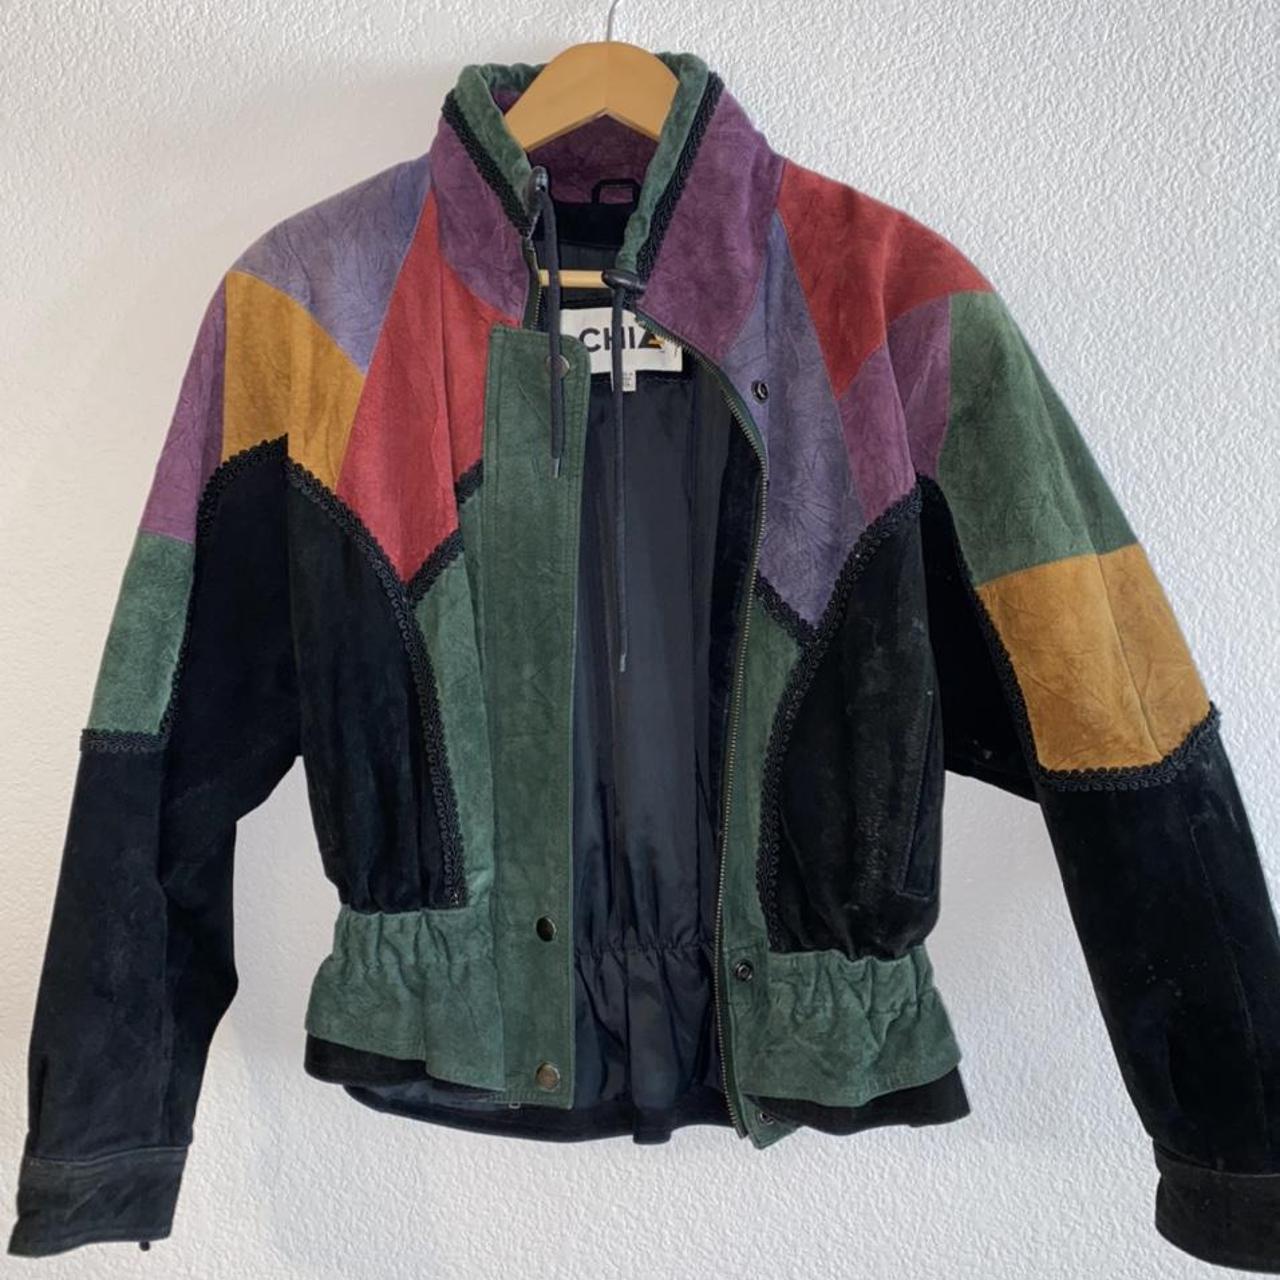 Product Image 1 - 90s Chia Suede Jacket